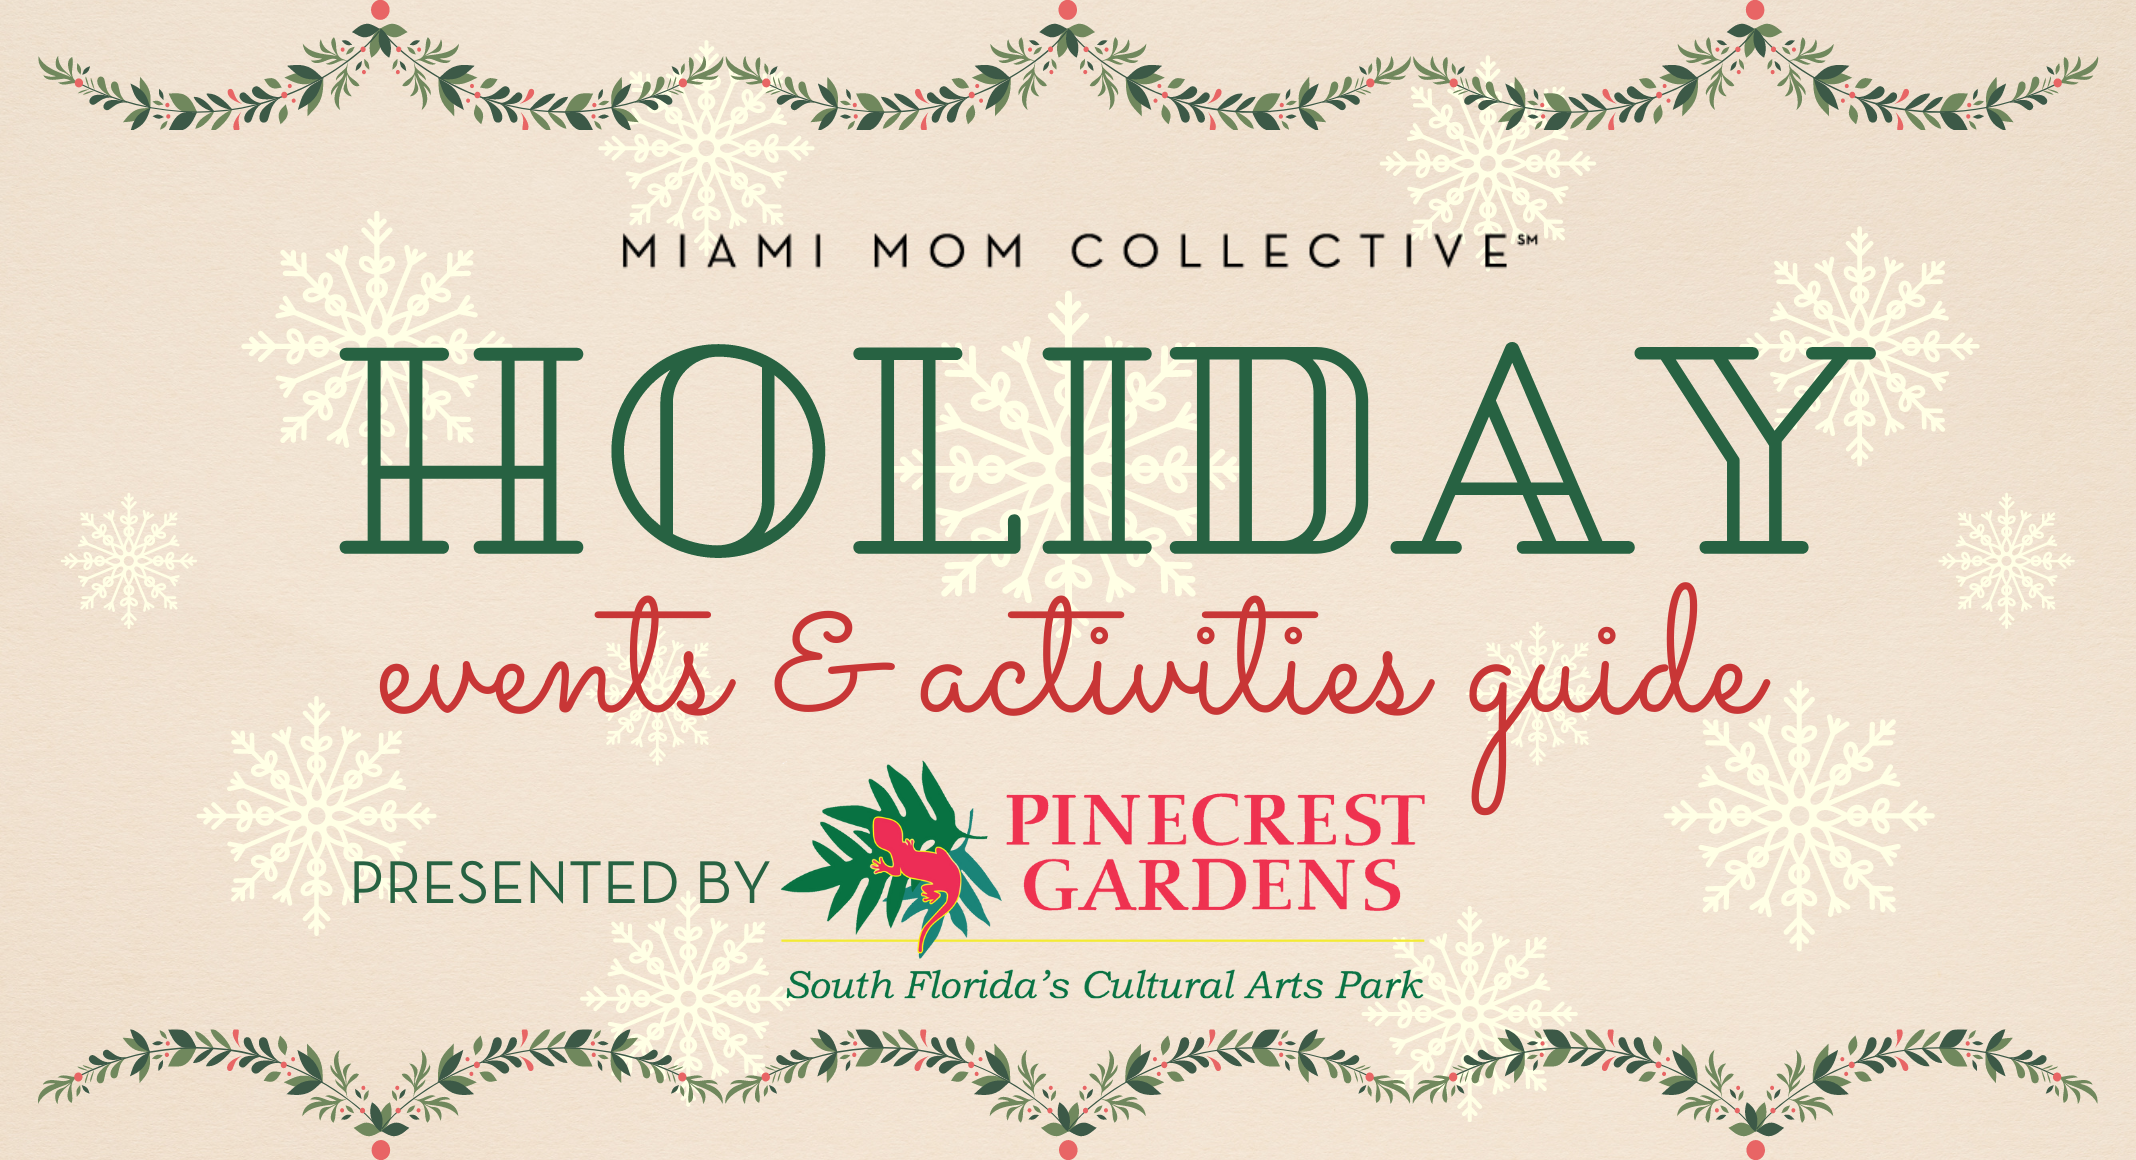 (The Ultimate Guide to 2021 Miami Area Holiday Events & Activities Presented by Pinecrest Gardens Lynda Lantz Editor Miami Mom Collective)